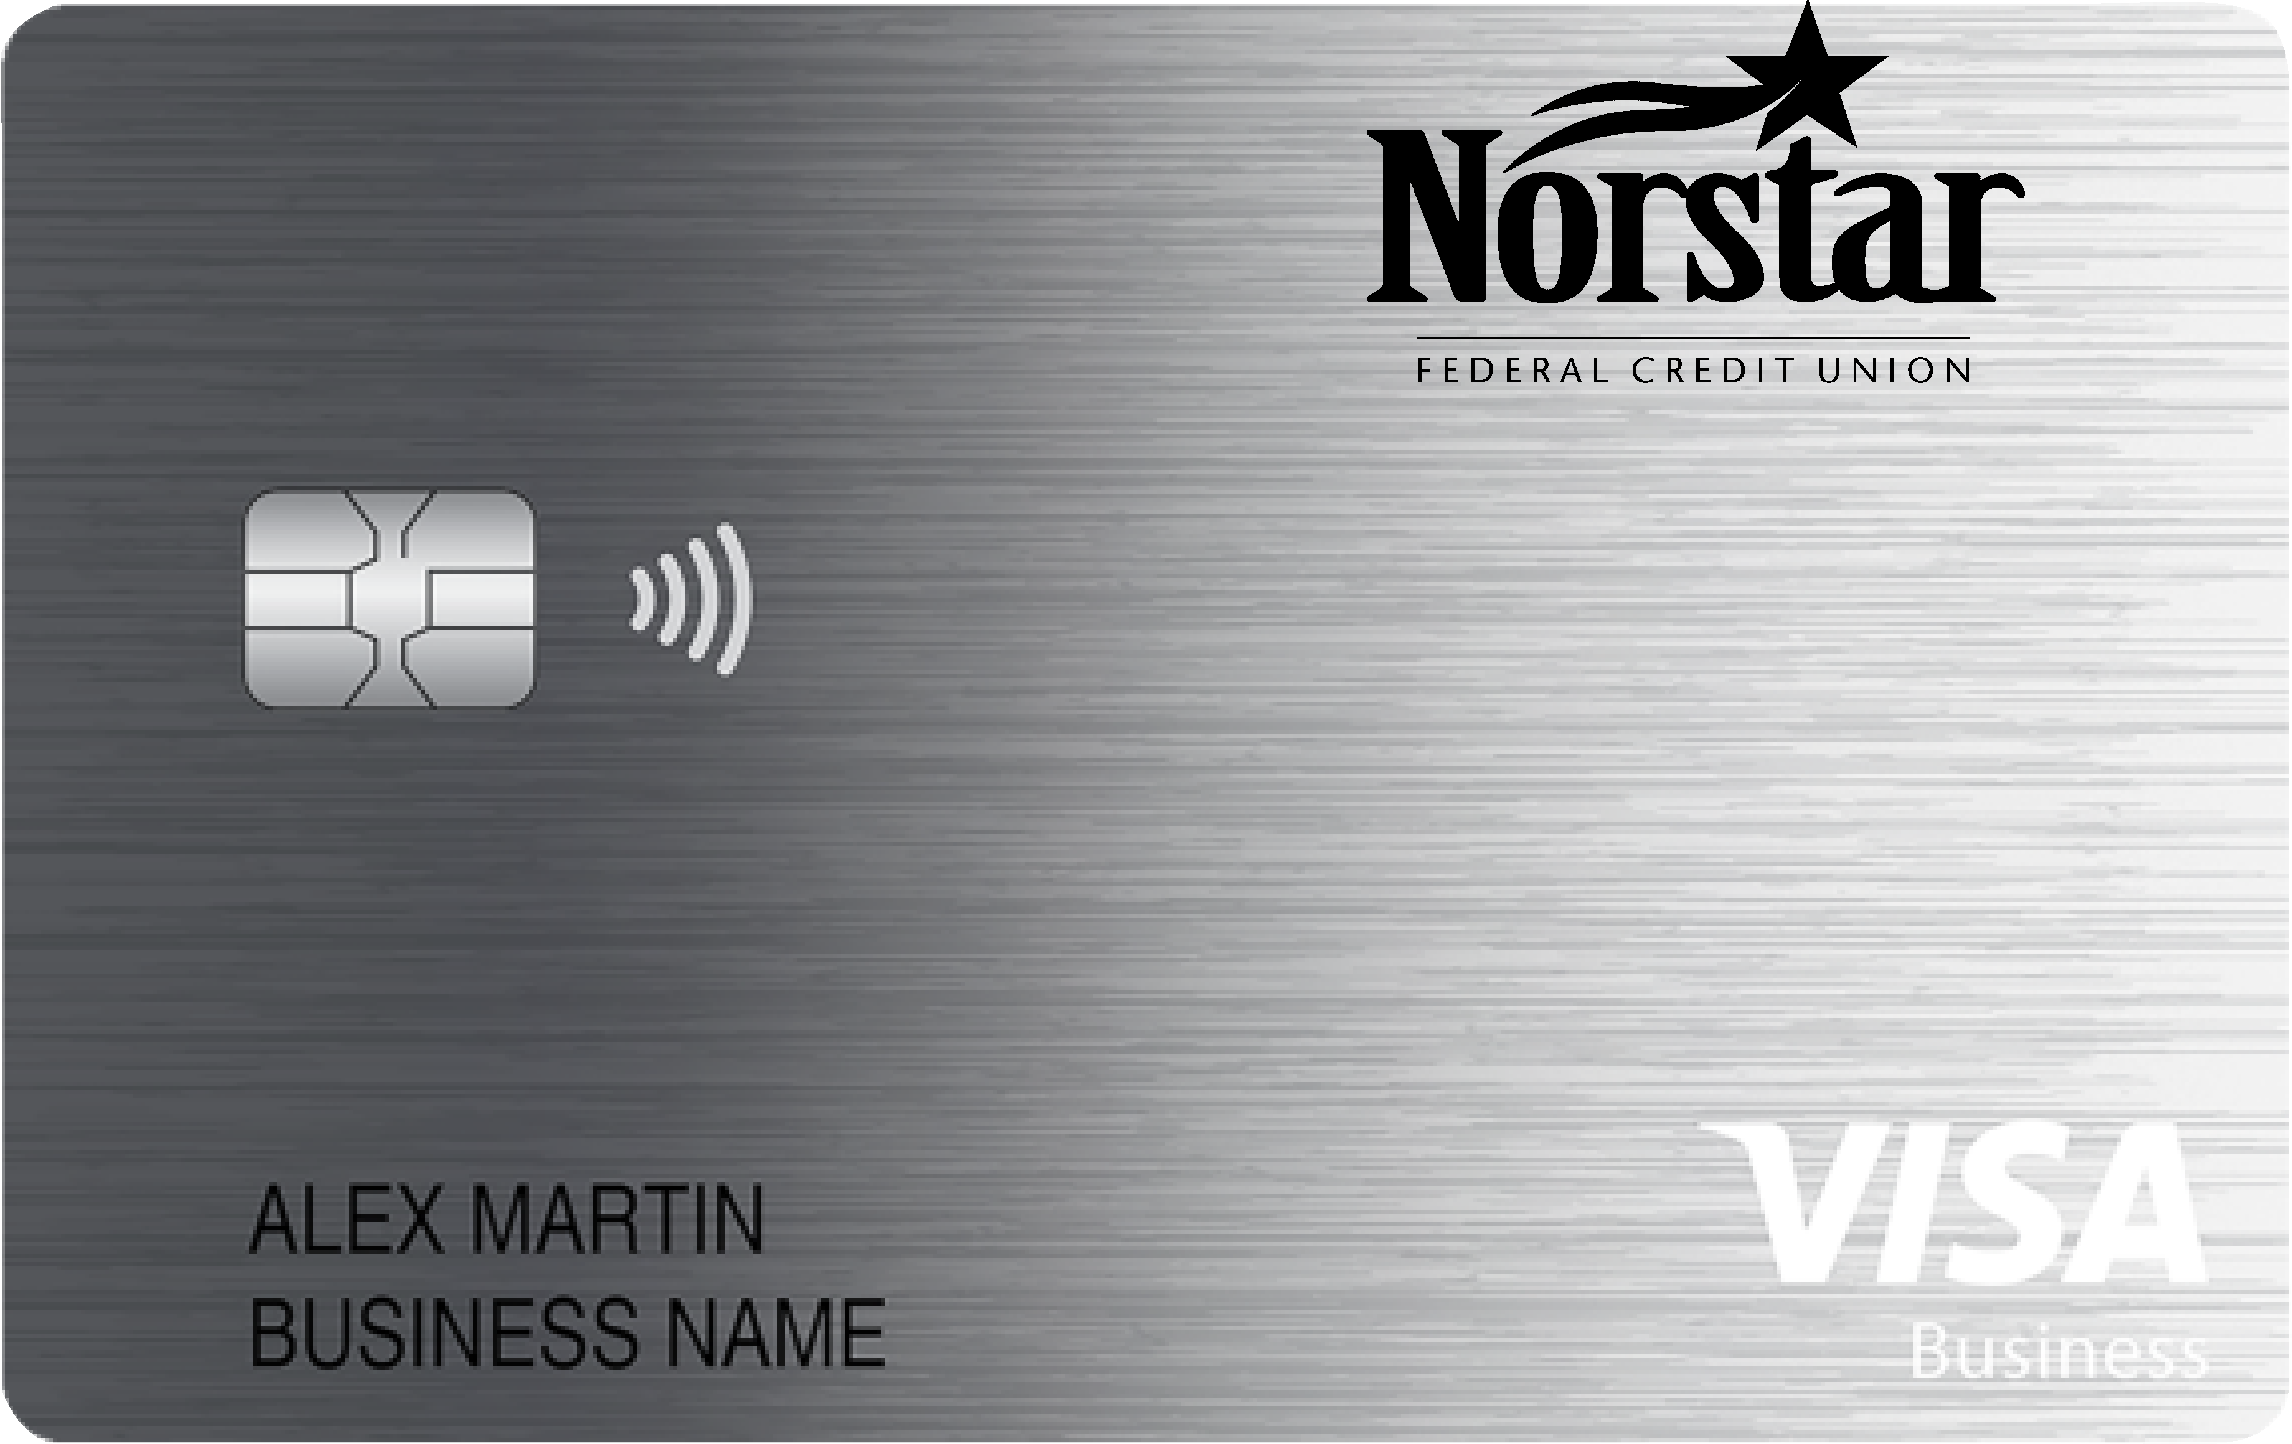 Norstar Federal Credit Union Business Cash Preferred Card